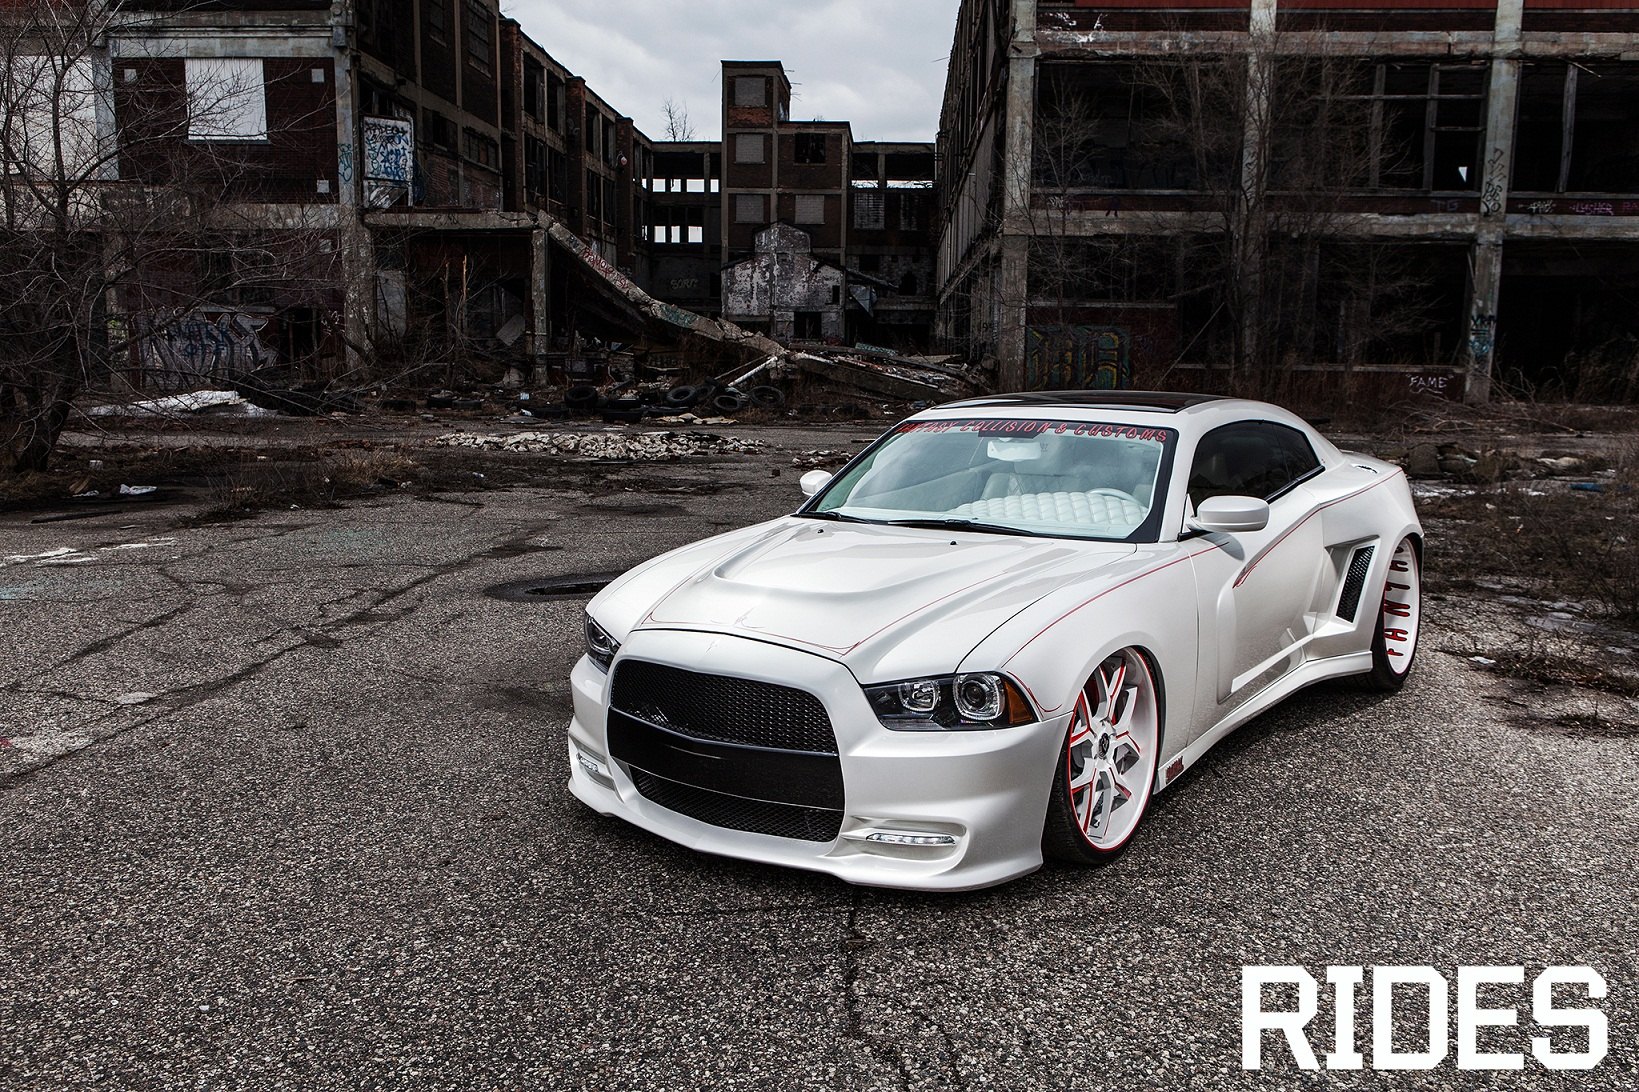 Widebody Dodge Charger Coupe - Photo by Jeremy Cliff